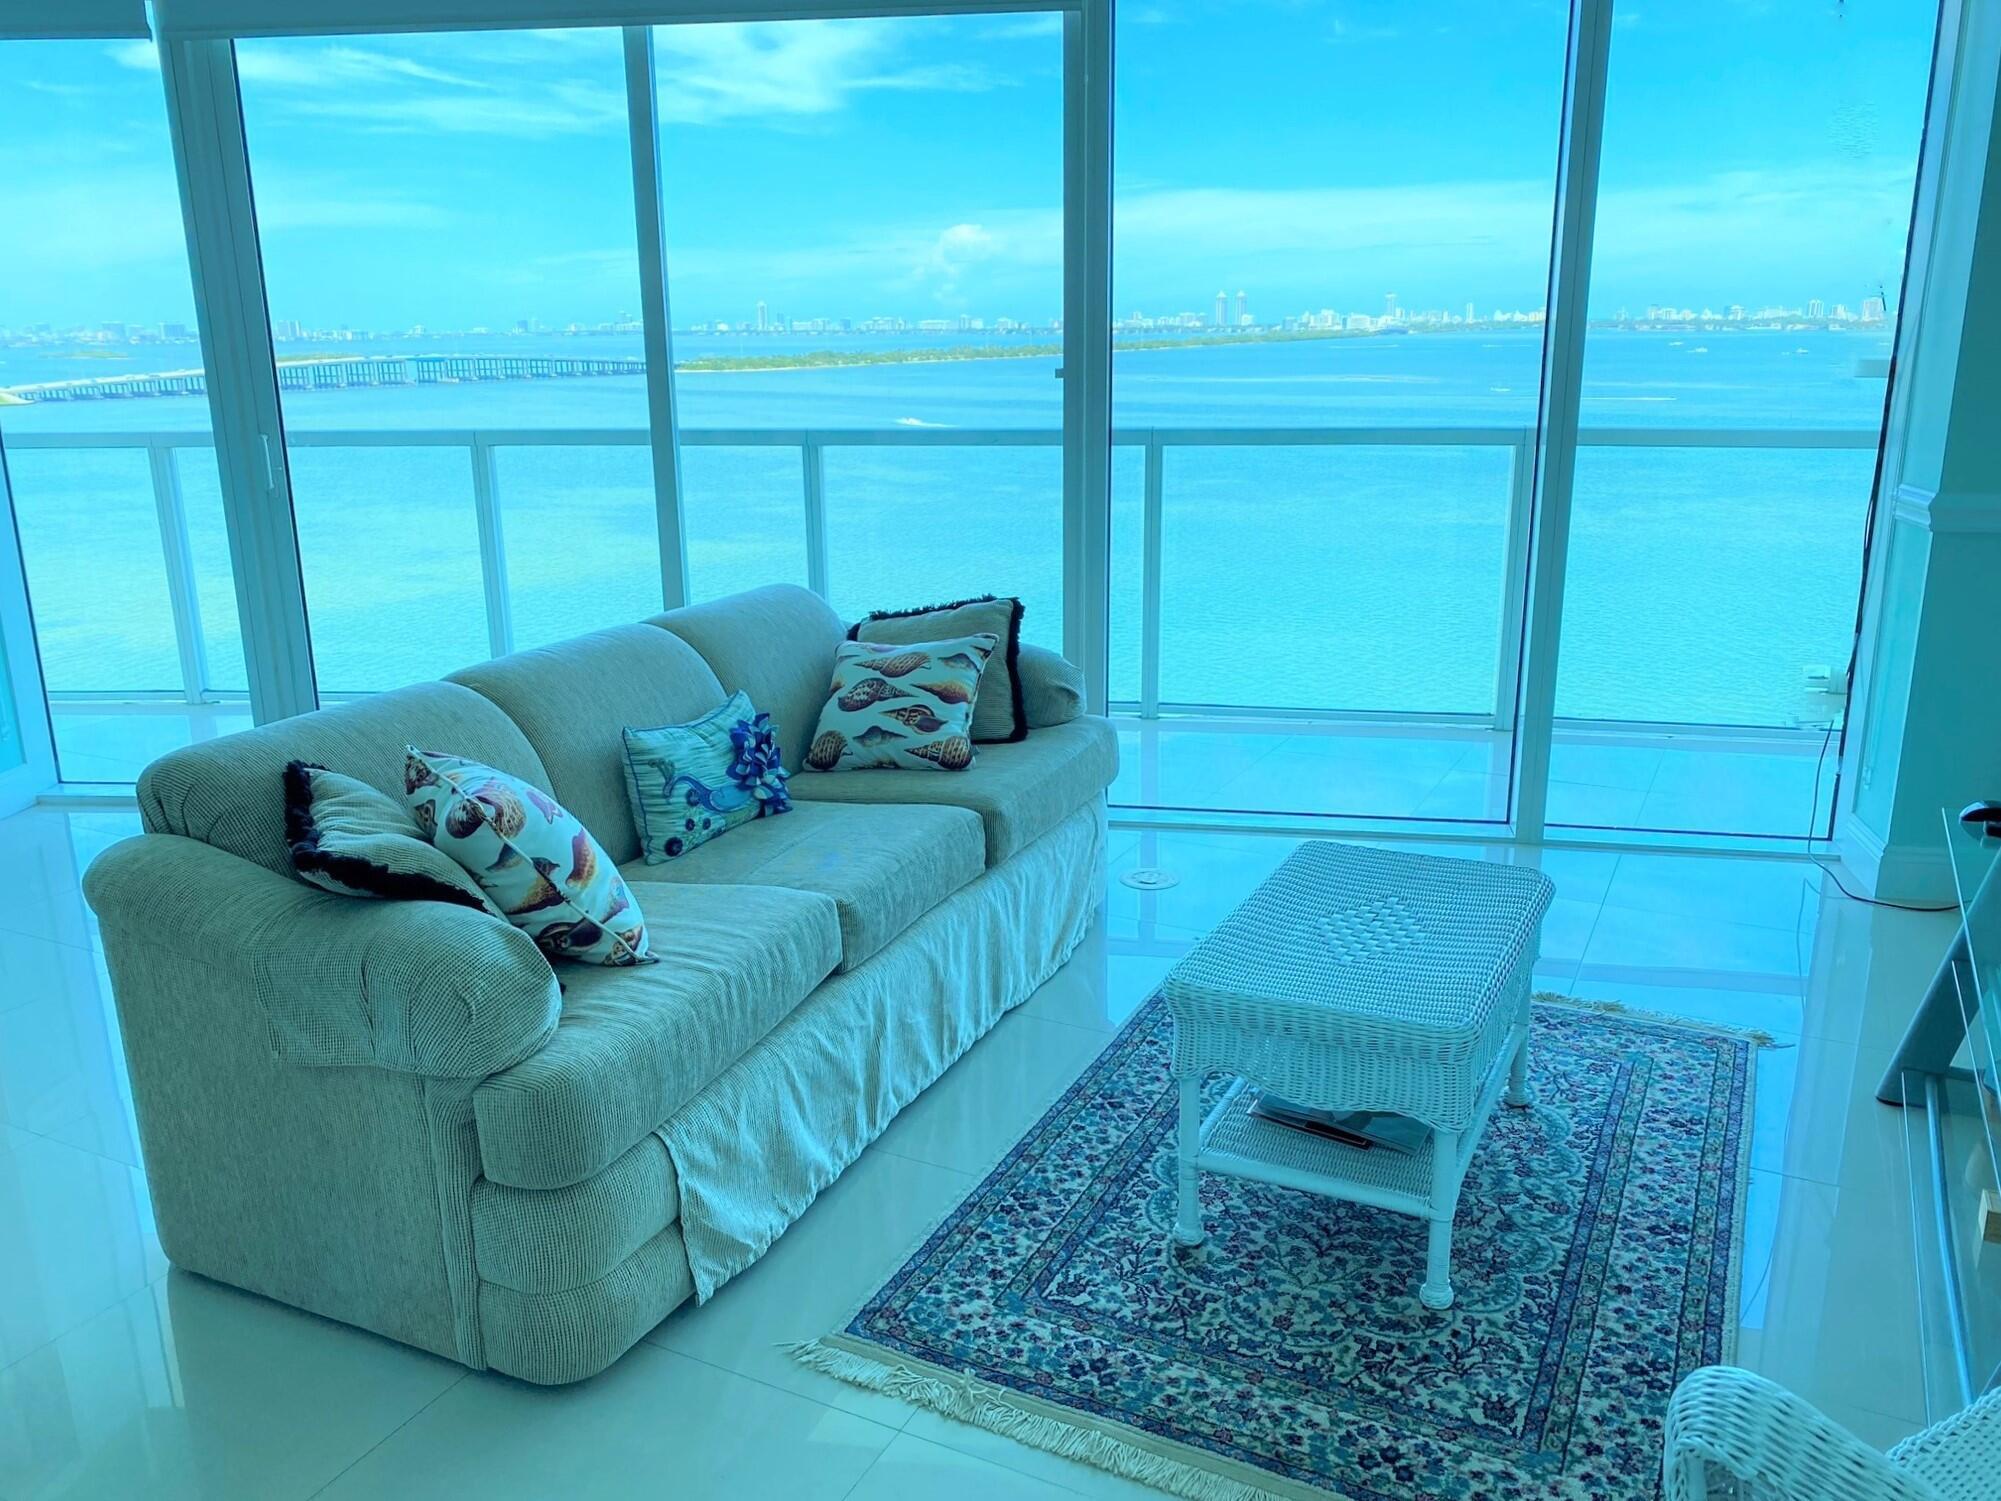 Seasonal 2br/2.5 bath fully furnished apt. for lease.Once you step into your apt, you are transported to Biscayne Bay. Stunning views of the bay and Miami Beach await.Floor-to-ceiling impact glass doors allow for unobstructed views from both bedrooms,living room and kitchen.Step out onto a 57 ft balcony with impact see through glass,from both bedrooms. SS appliances.Onyx boast a heated pool,jacuzzi,billiard & activities rooms,recently renovated gym,yoga area and sauna.Designated parking spot. Excellent location in Edgewater,with restaurants,shops and entertainment within walking distance. 1 mile to Adrienne Arsht Ctr, 1mi to Wynwood,Art Basel,1.3mi to Design District.Min. lease 6mo. Max full time occupancy 4 people.Water, basic cable & basic internet included. Moving dates are flexible.